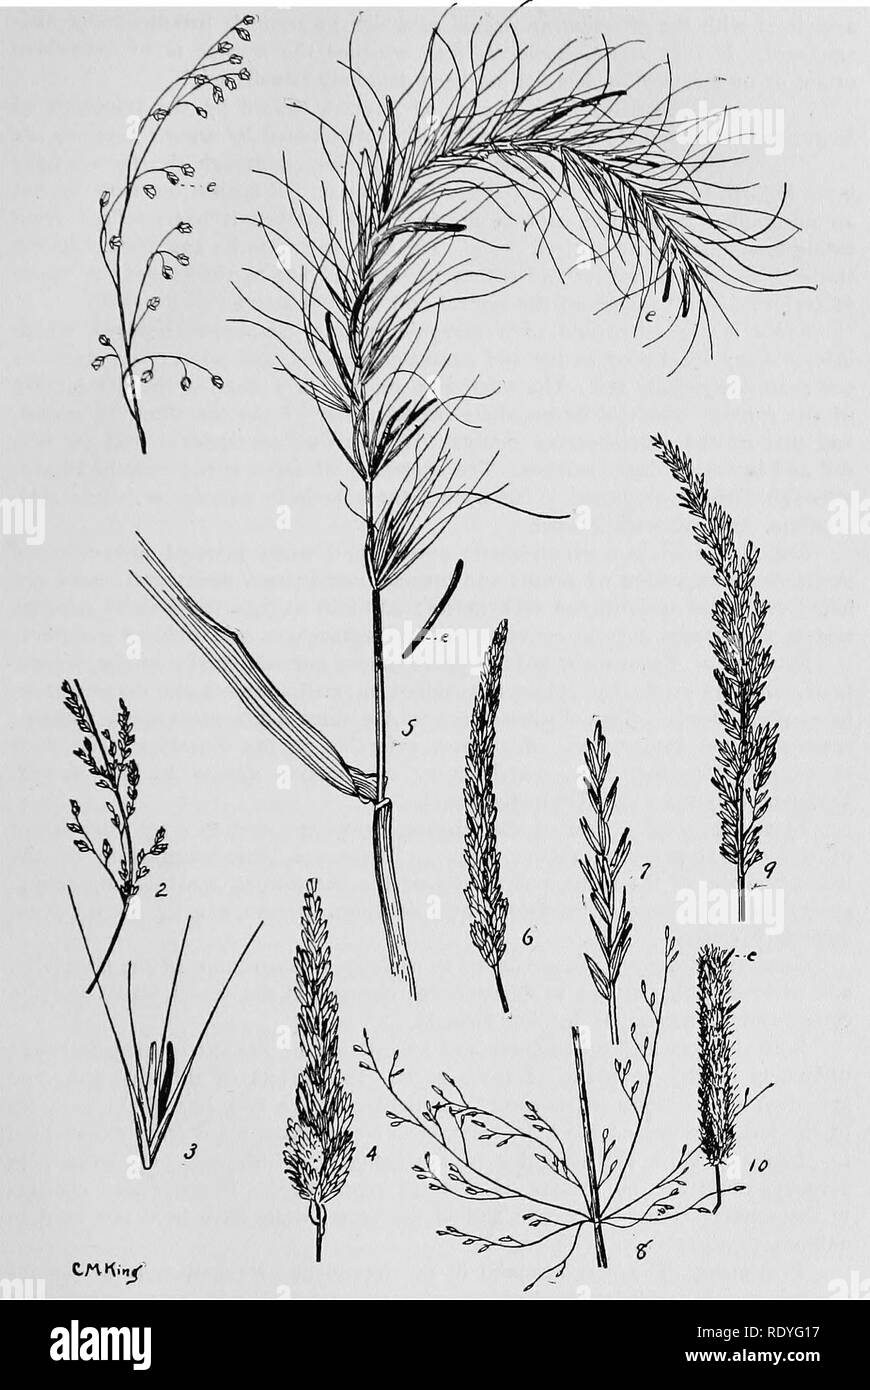 . A manual of poisonous plants, chiefly of eastern North America, with brief notes on economic and medicinal plants, and numerous illustrations. Poisonous plants. FORAGE POISONING ERGOTISM 27. ERGOT ON VARIOUS GRASSES FiB. 4—1. Manna Grass {Glyceria nervata). 2. Blue Grass (Poo). 3. Spikelet of Bottle Crass iAsprella Hystrix). 4. Reed Canary Grass (Phalaris Arundmacea). 5. Wild Rye (Ely- mus robustus). 6. Koeleria. cristata. 7. Wheat Grass {Agropyron Smiihii). 8. Red Top (.Agrostis alba). 9. Blue Joint (.Calamagrostis canadensis). 10. Timothy (Phleum pratense).. Please note that these images a Stock Photo